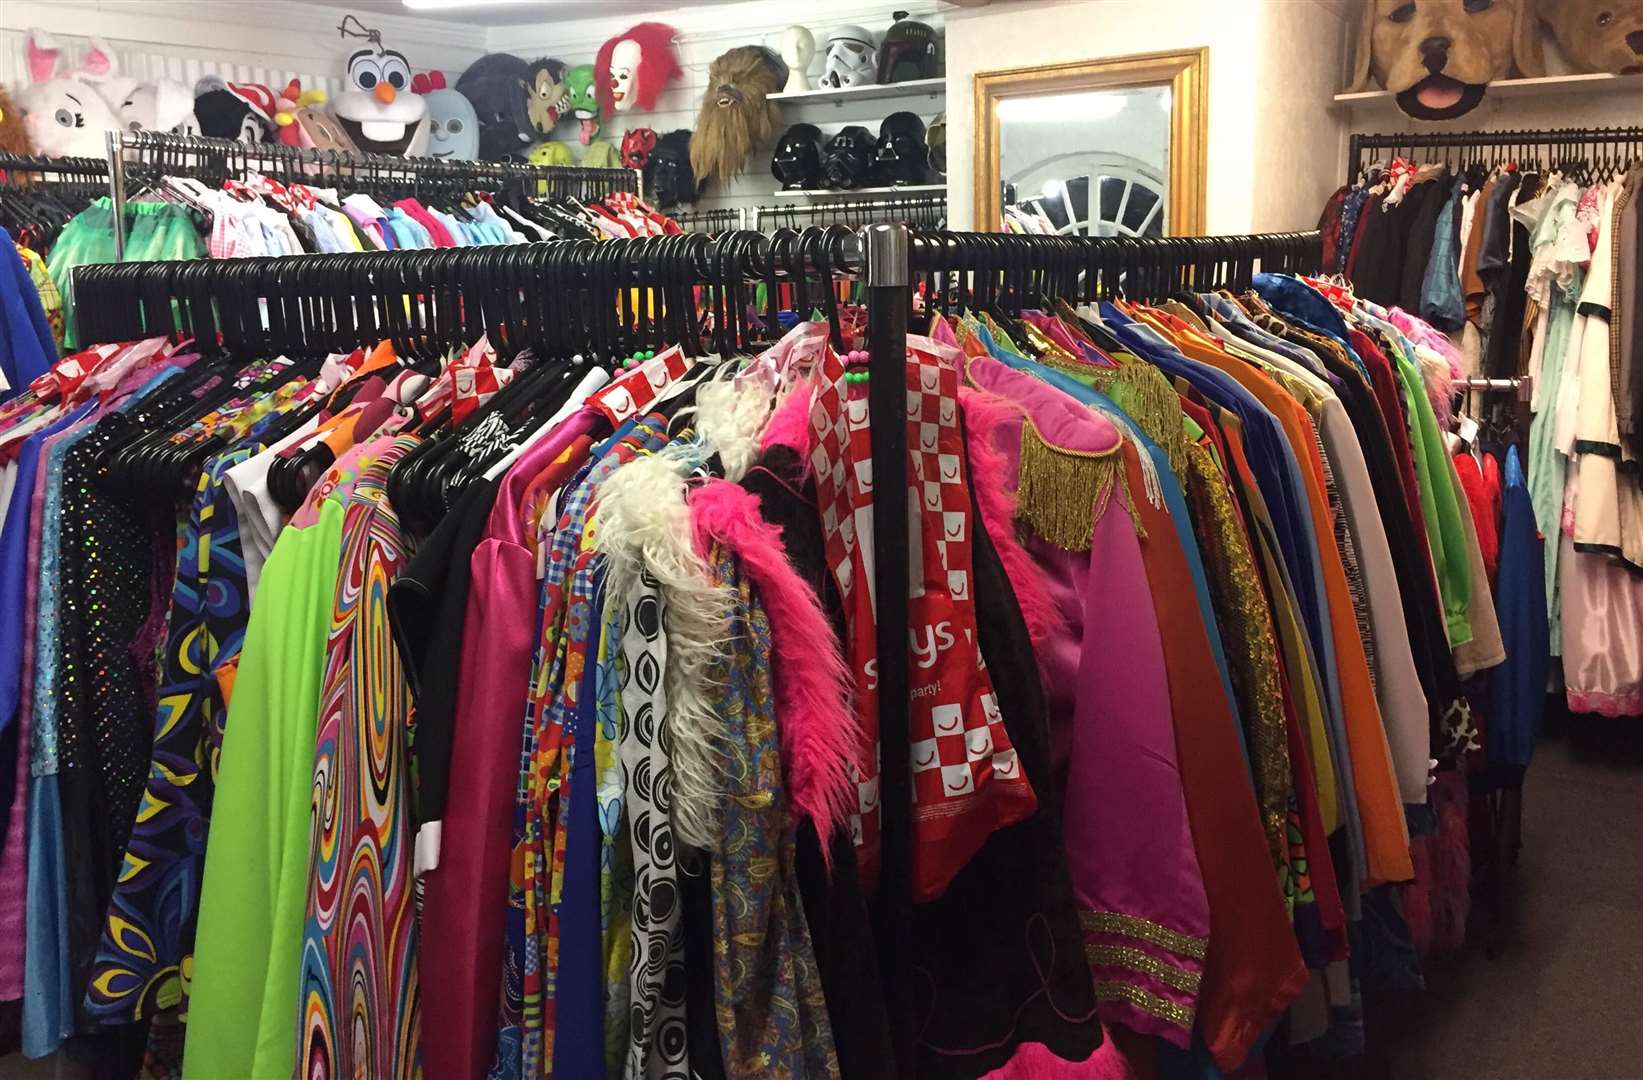 Harlequin has 5,000 items for sale and 2,000 for rental